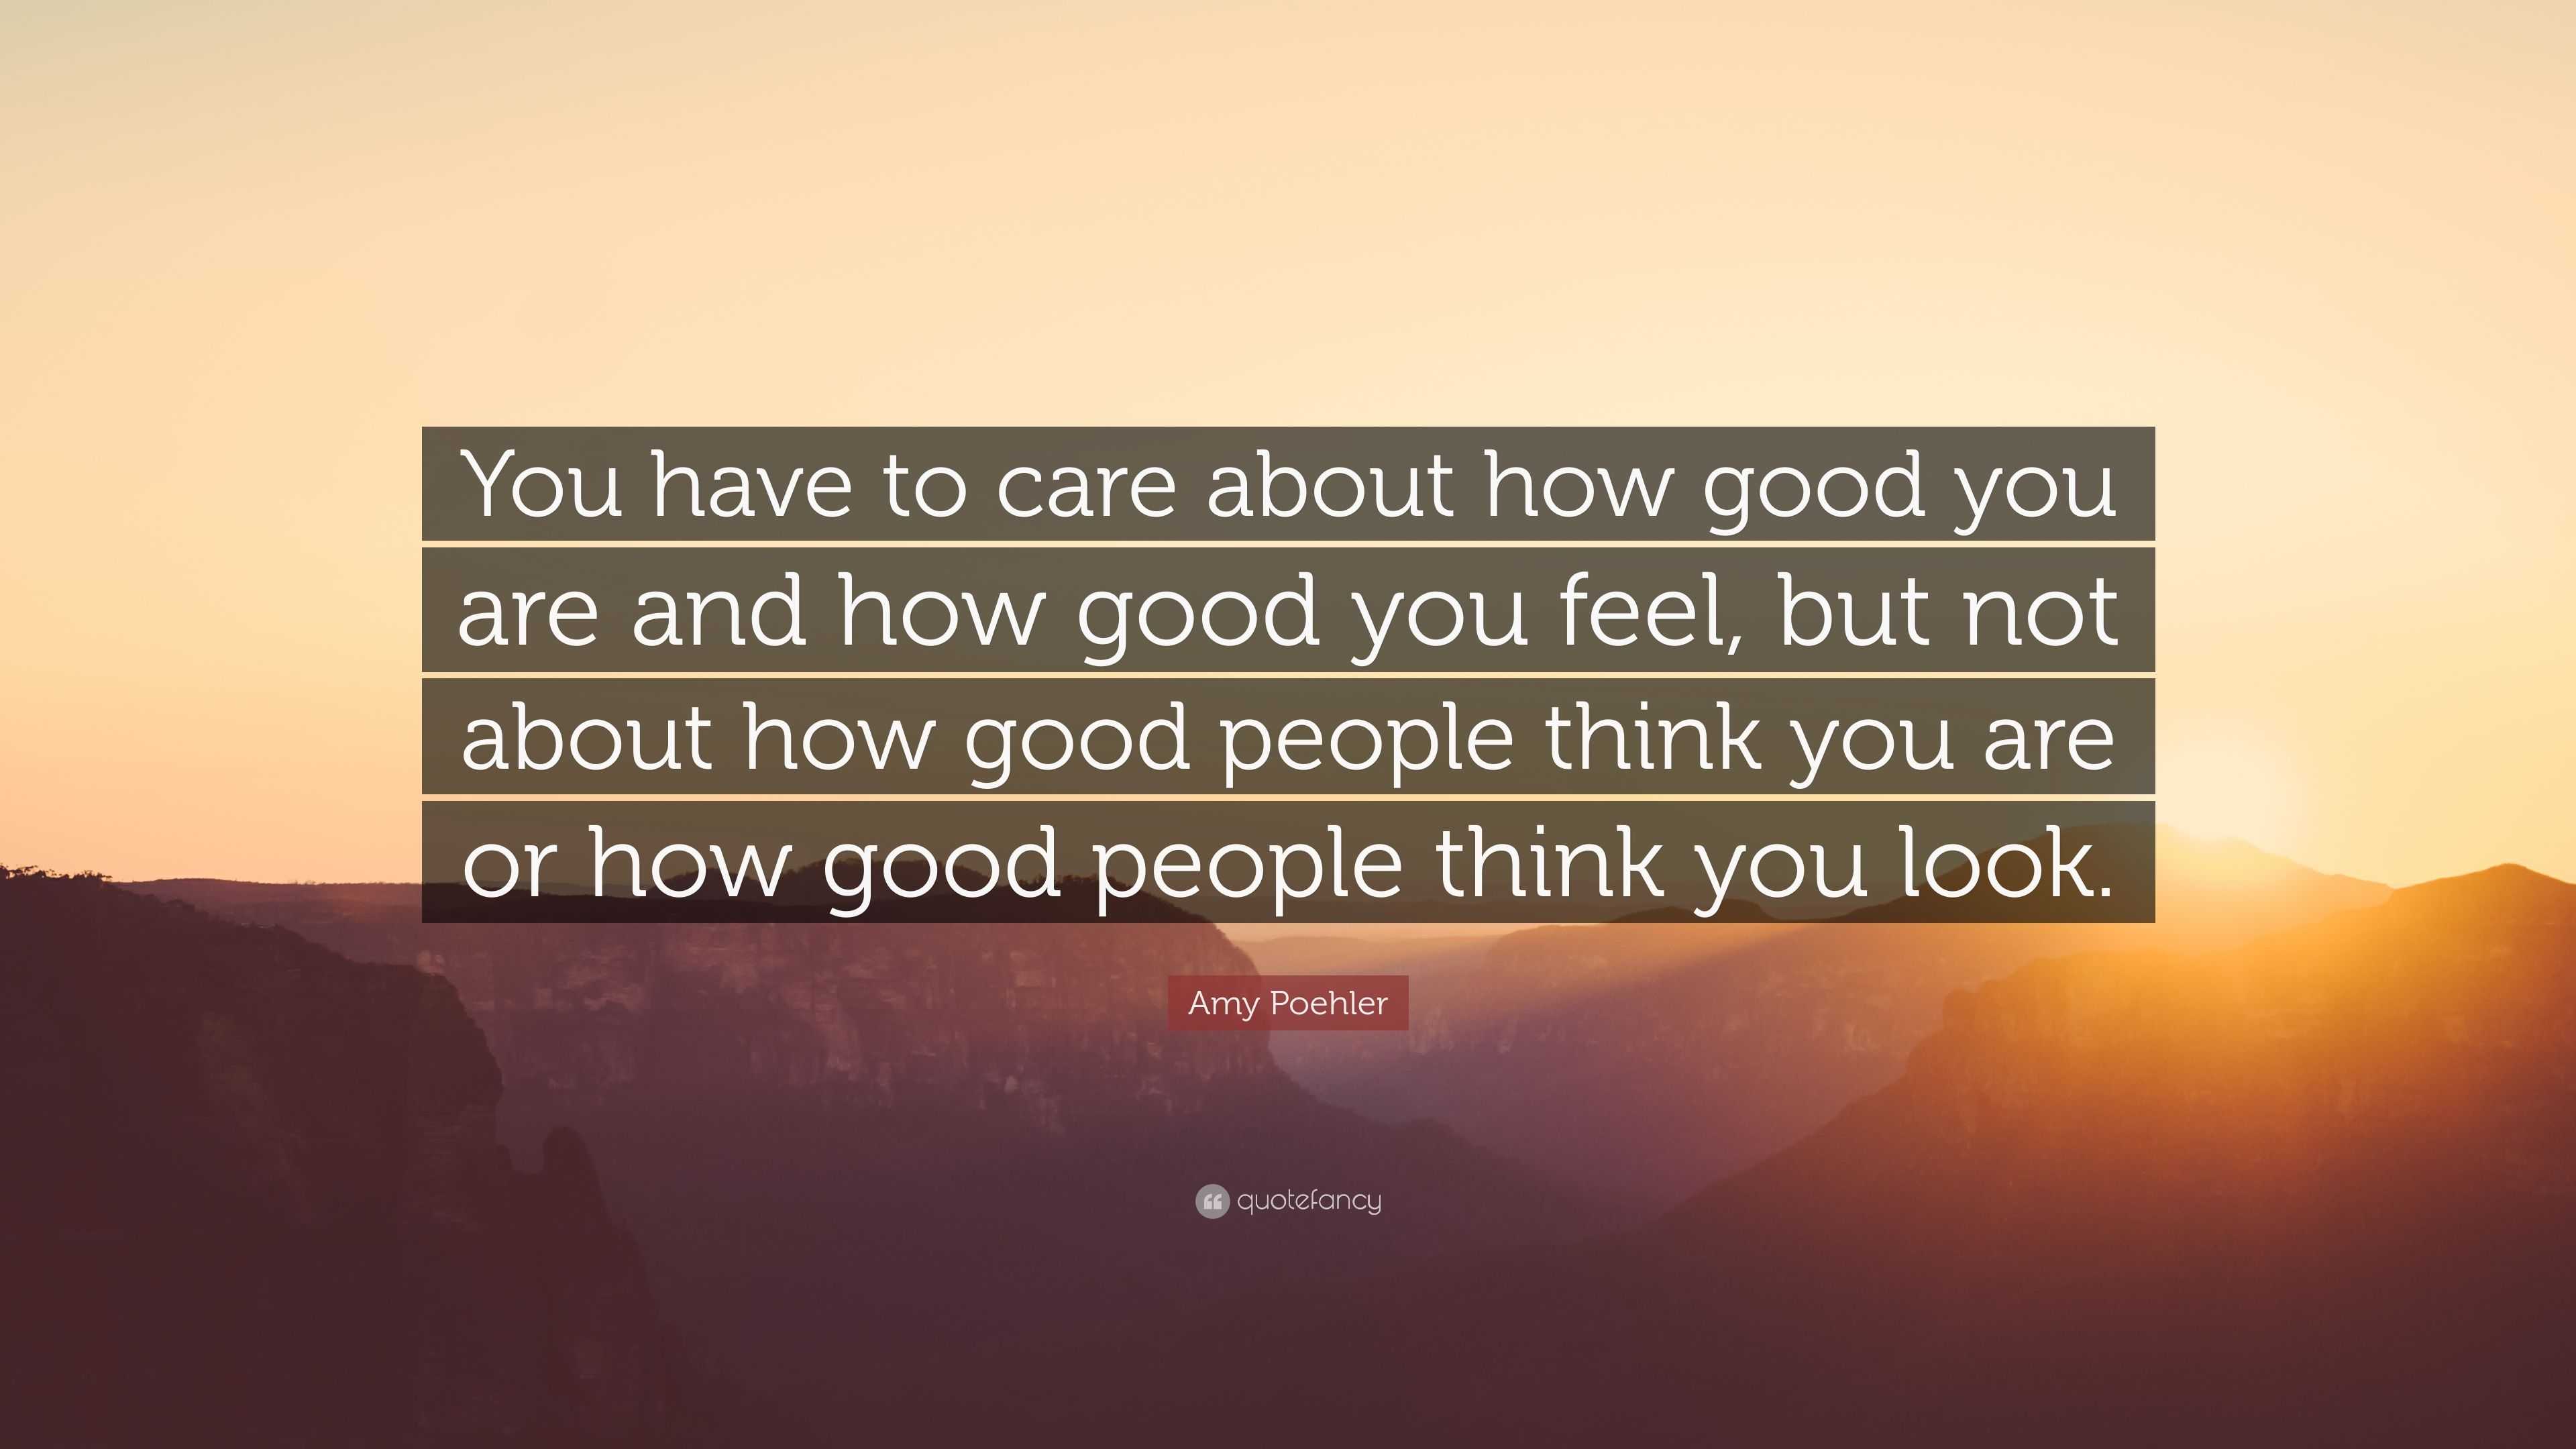 Amy Poehler Quote: “You have to care about how good you are and how ...